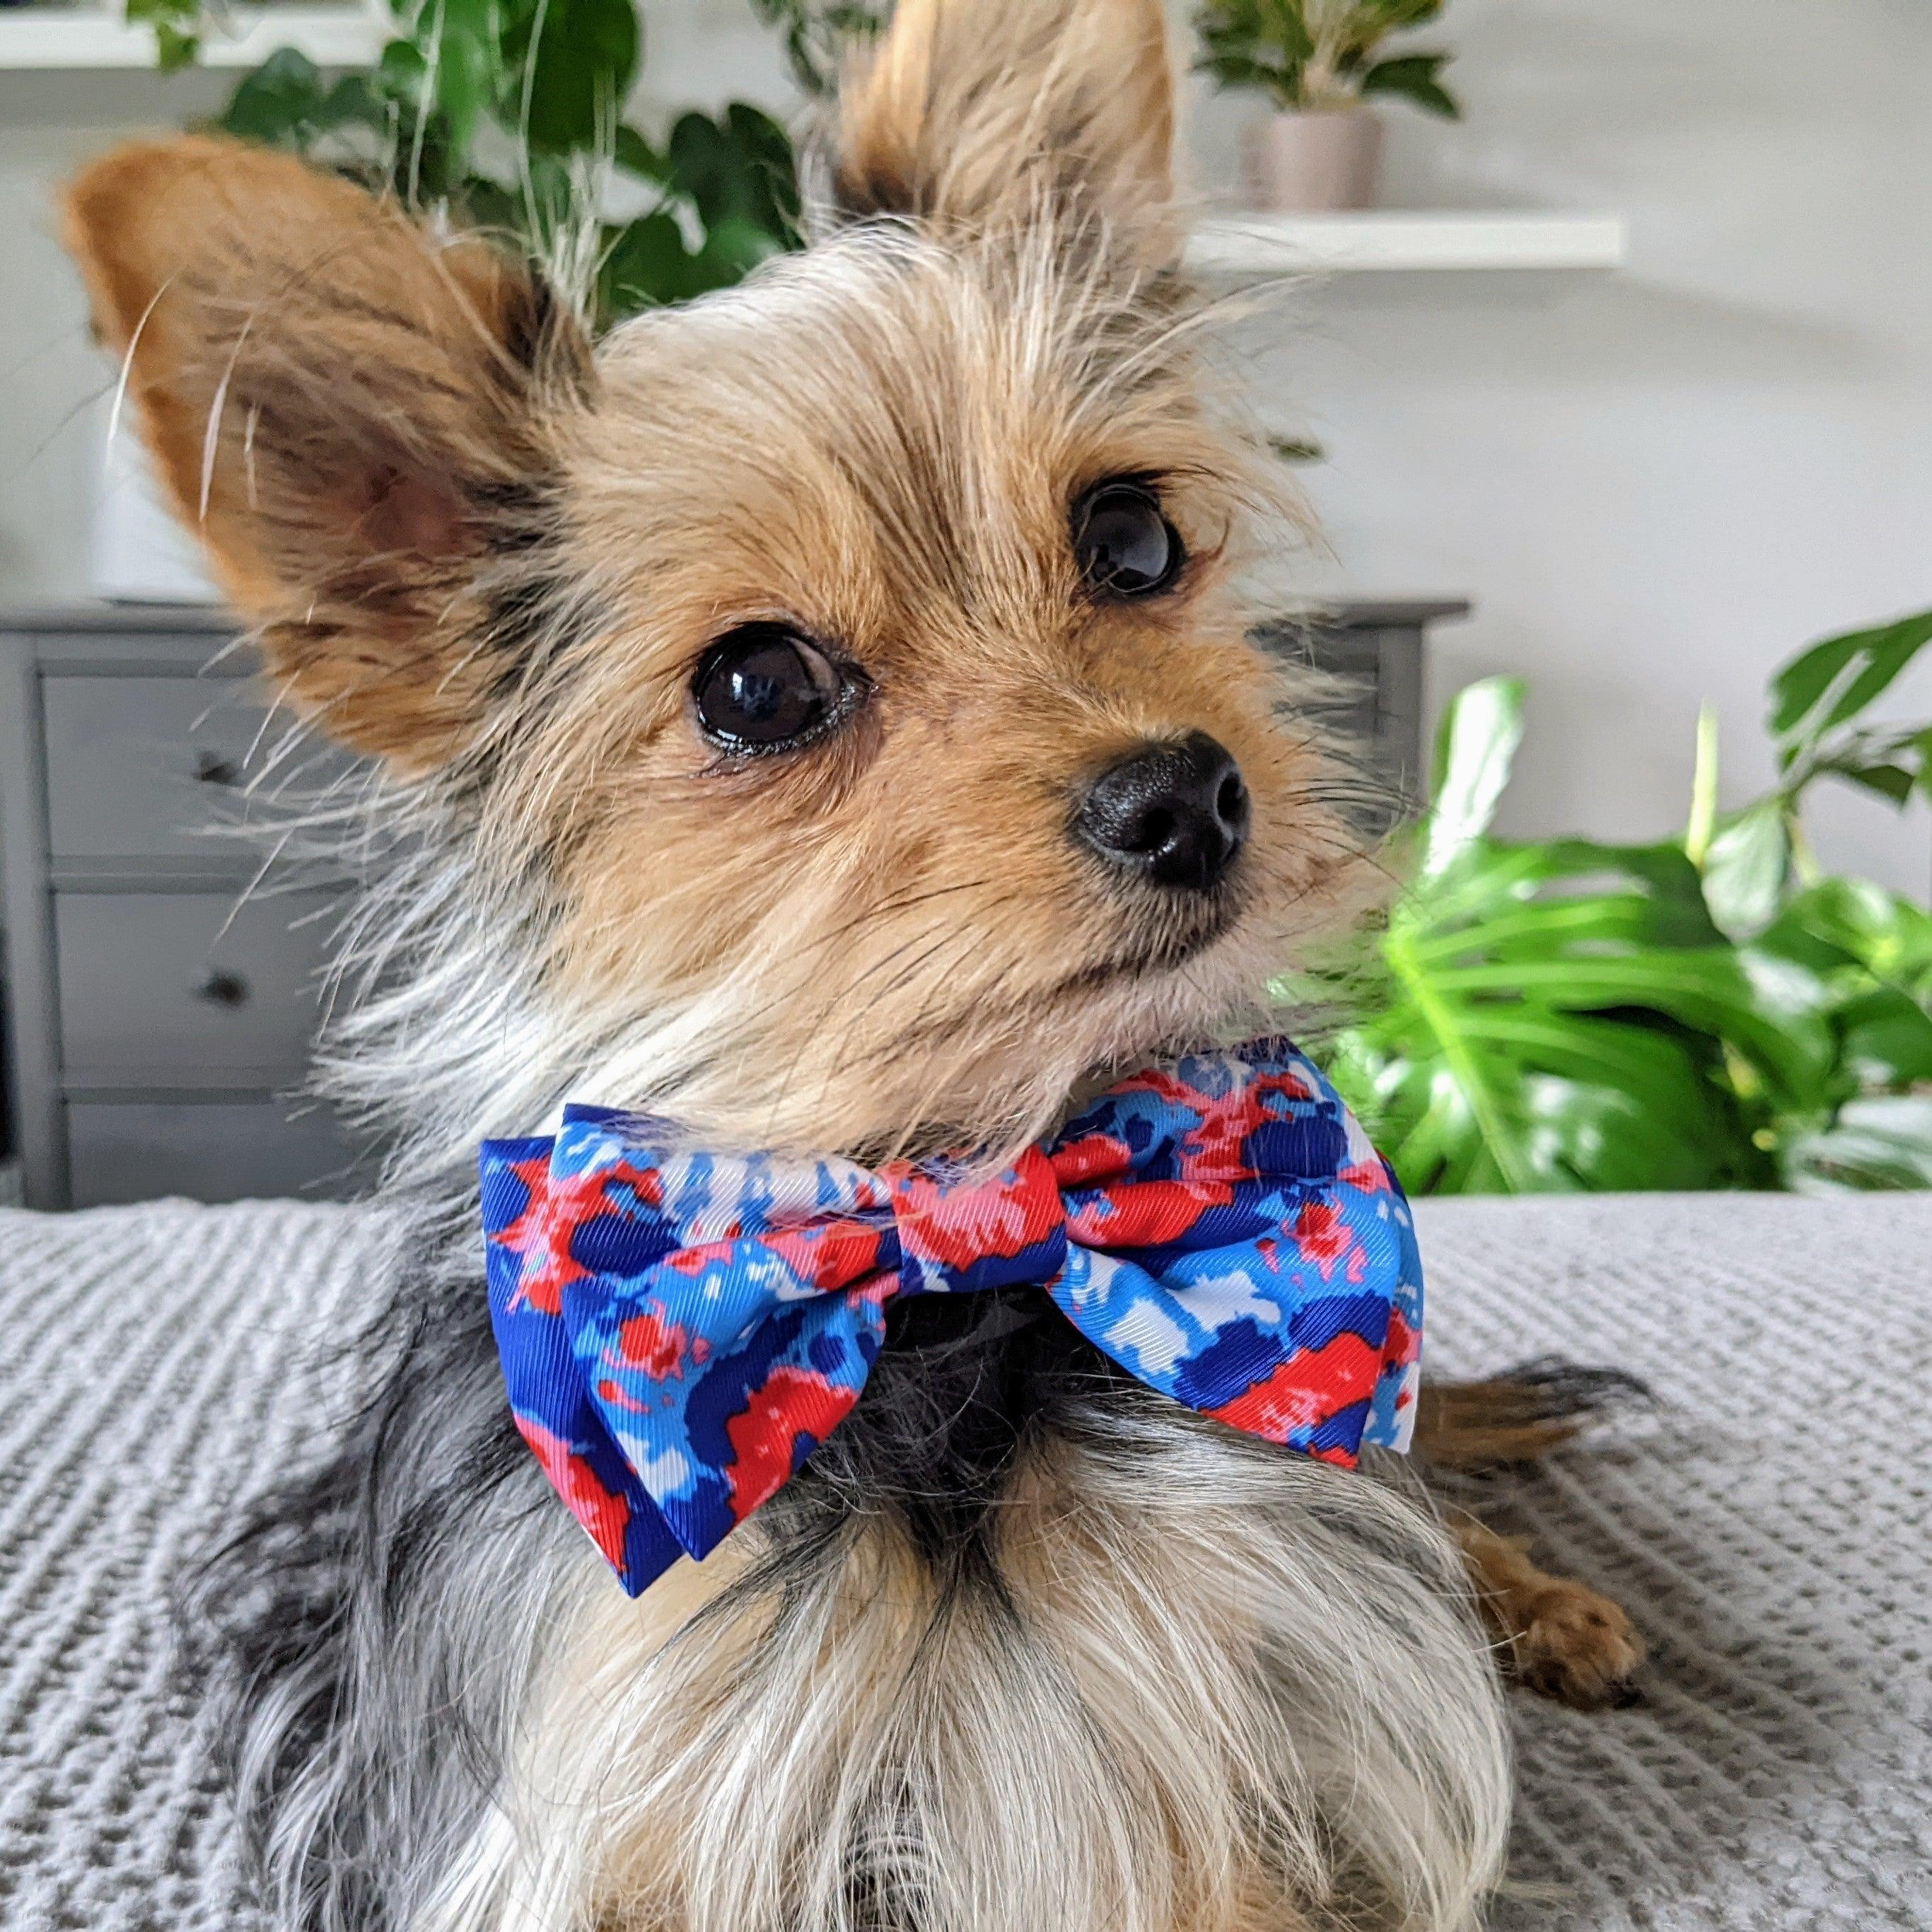 Huxley & Kent Leaves & Nuts Bow Tie